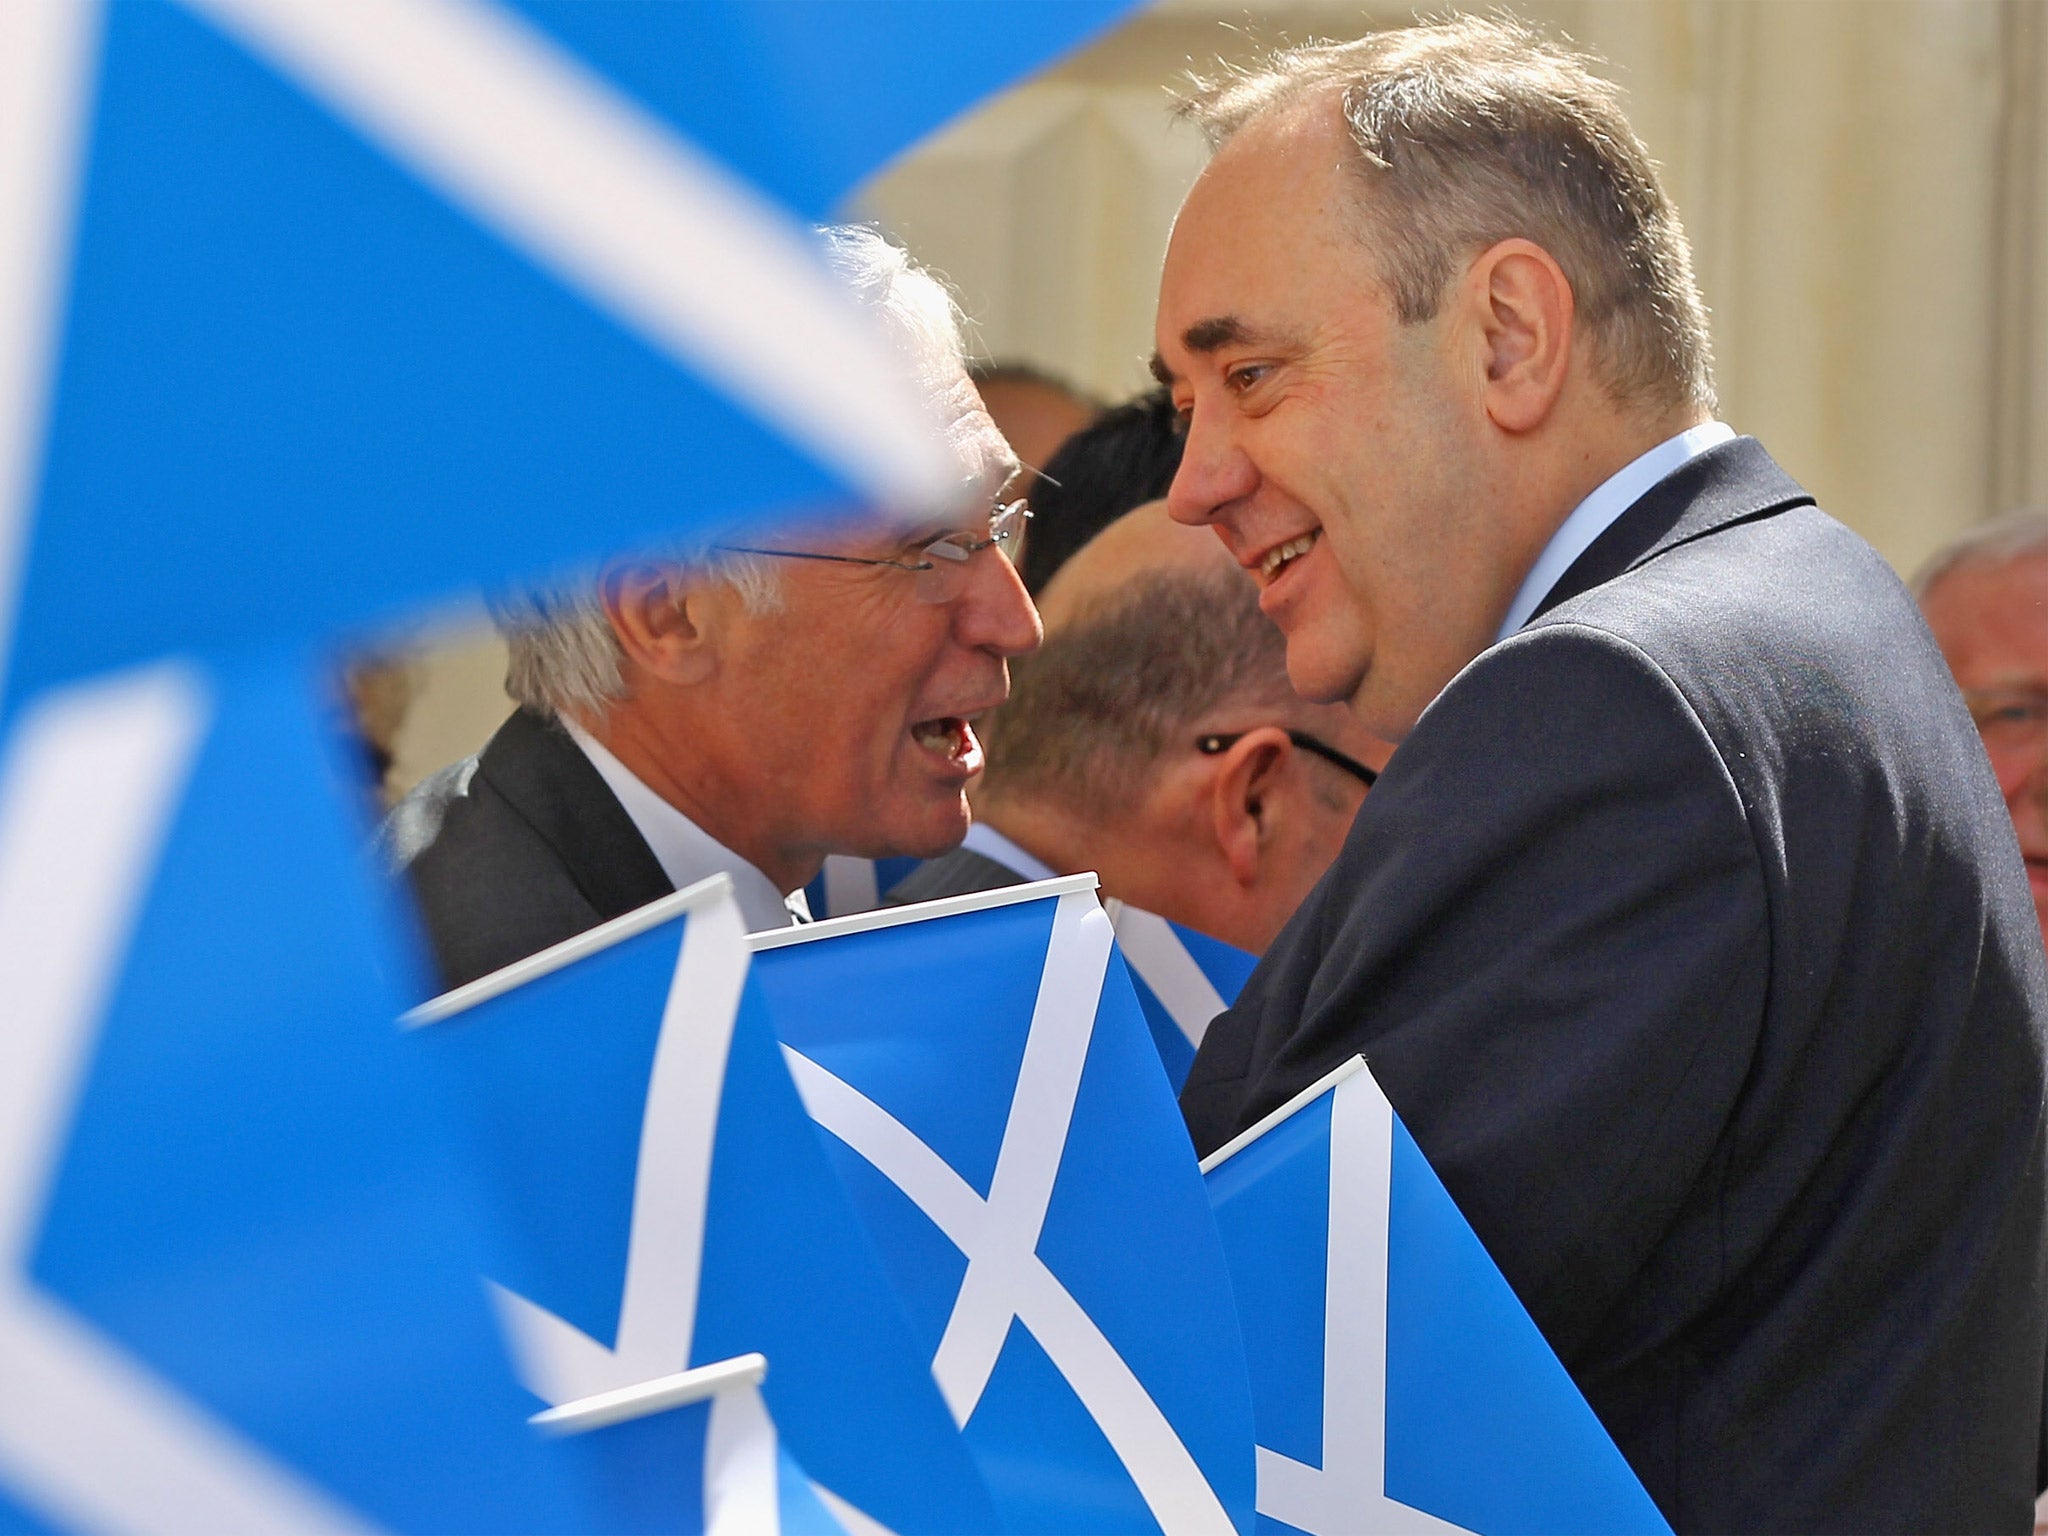 Alex Salmond is promising every Scot a £1,000 windfall if they decide to leave the Union